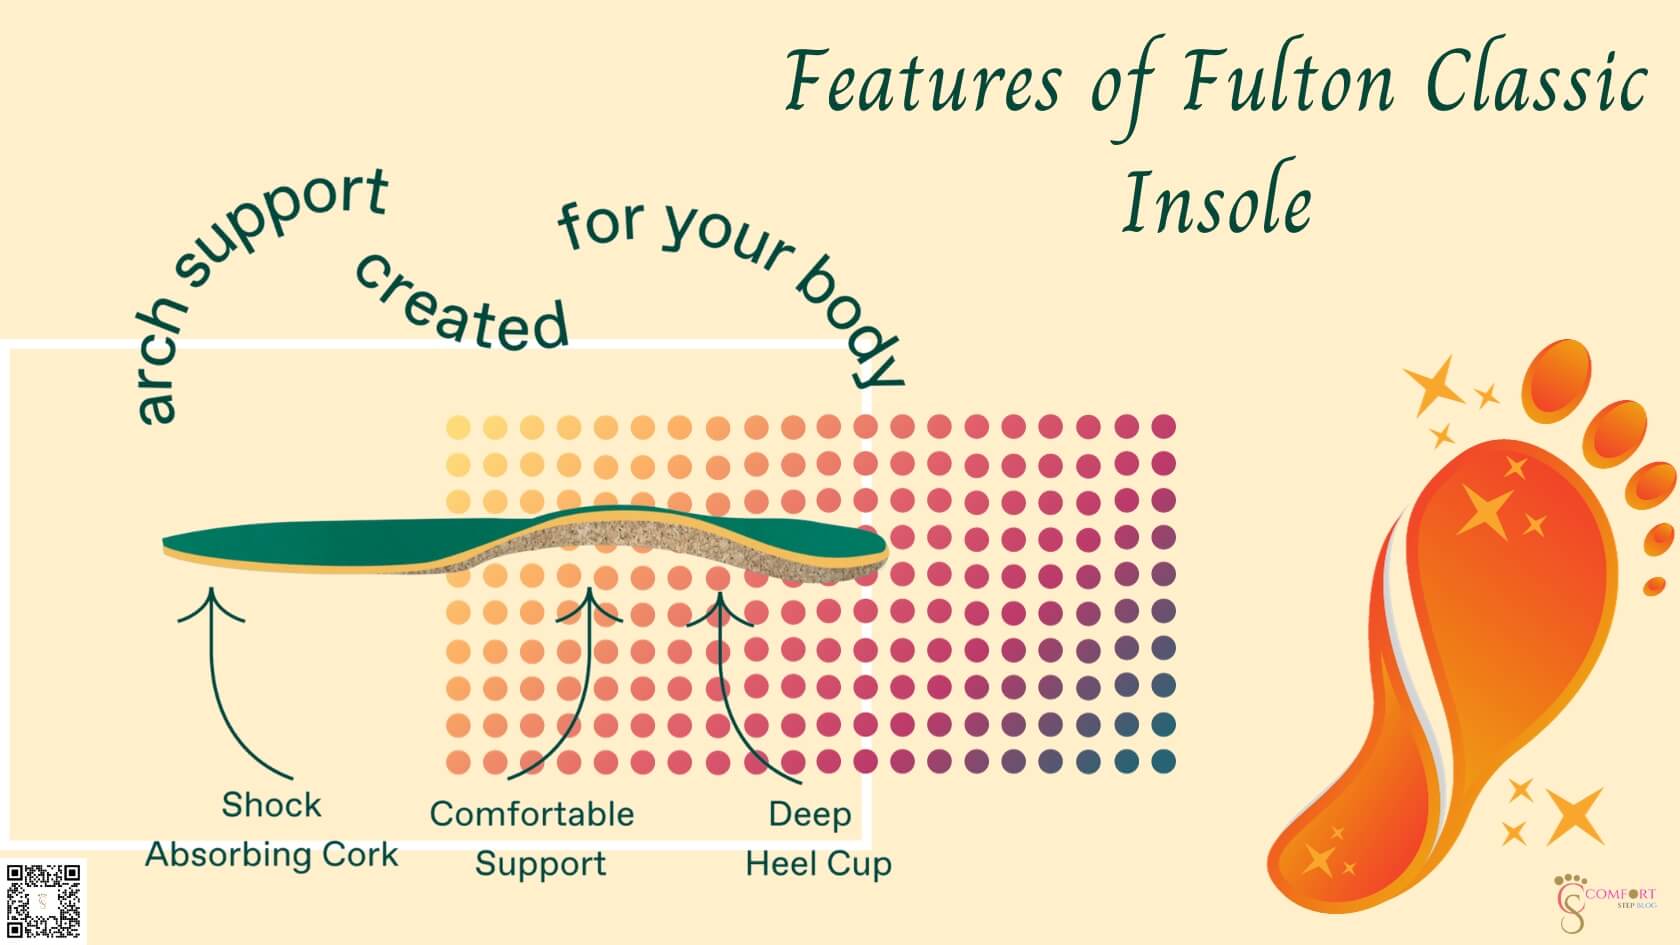 Features of Fulton Classic Insole